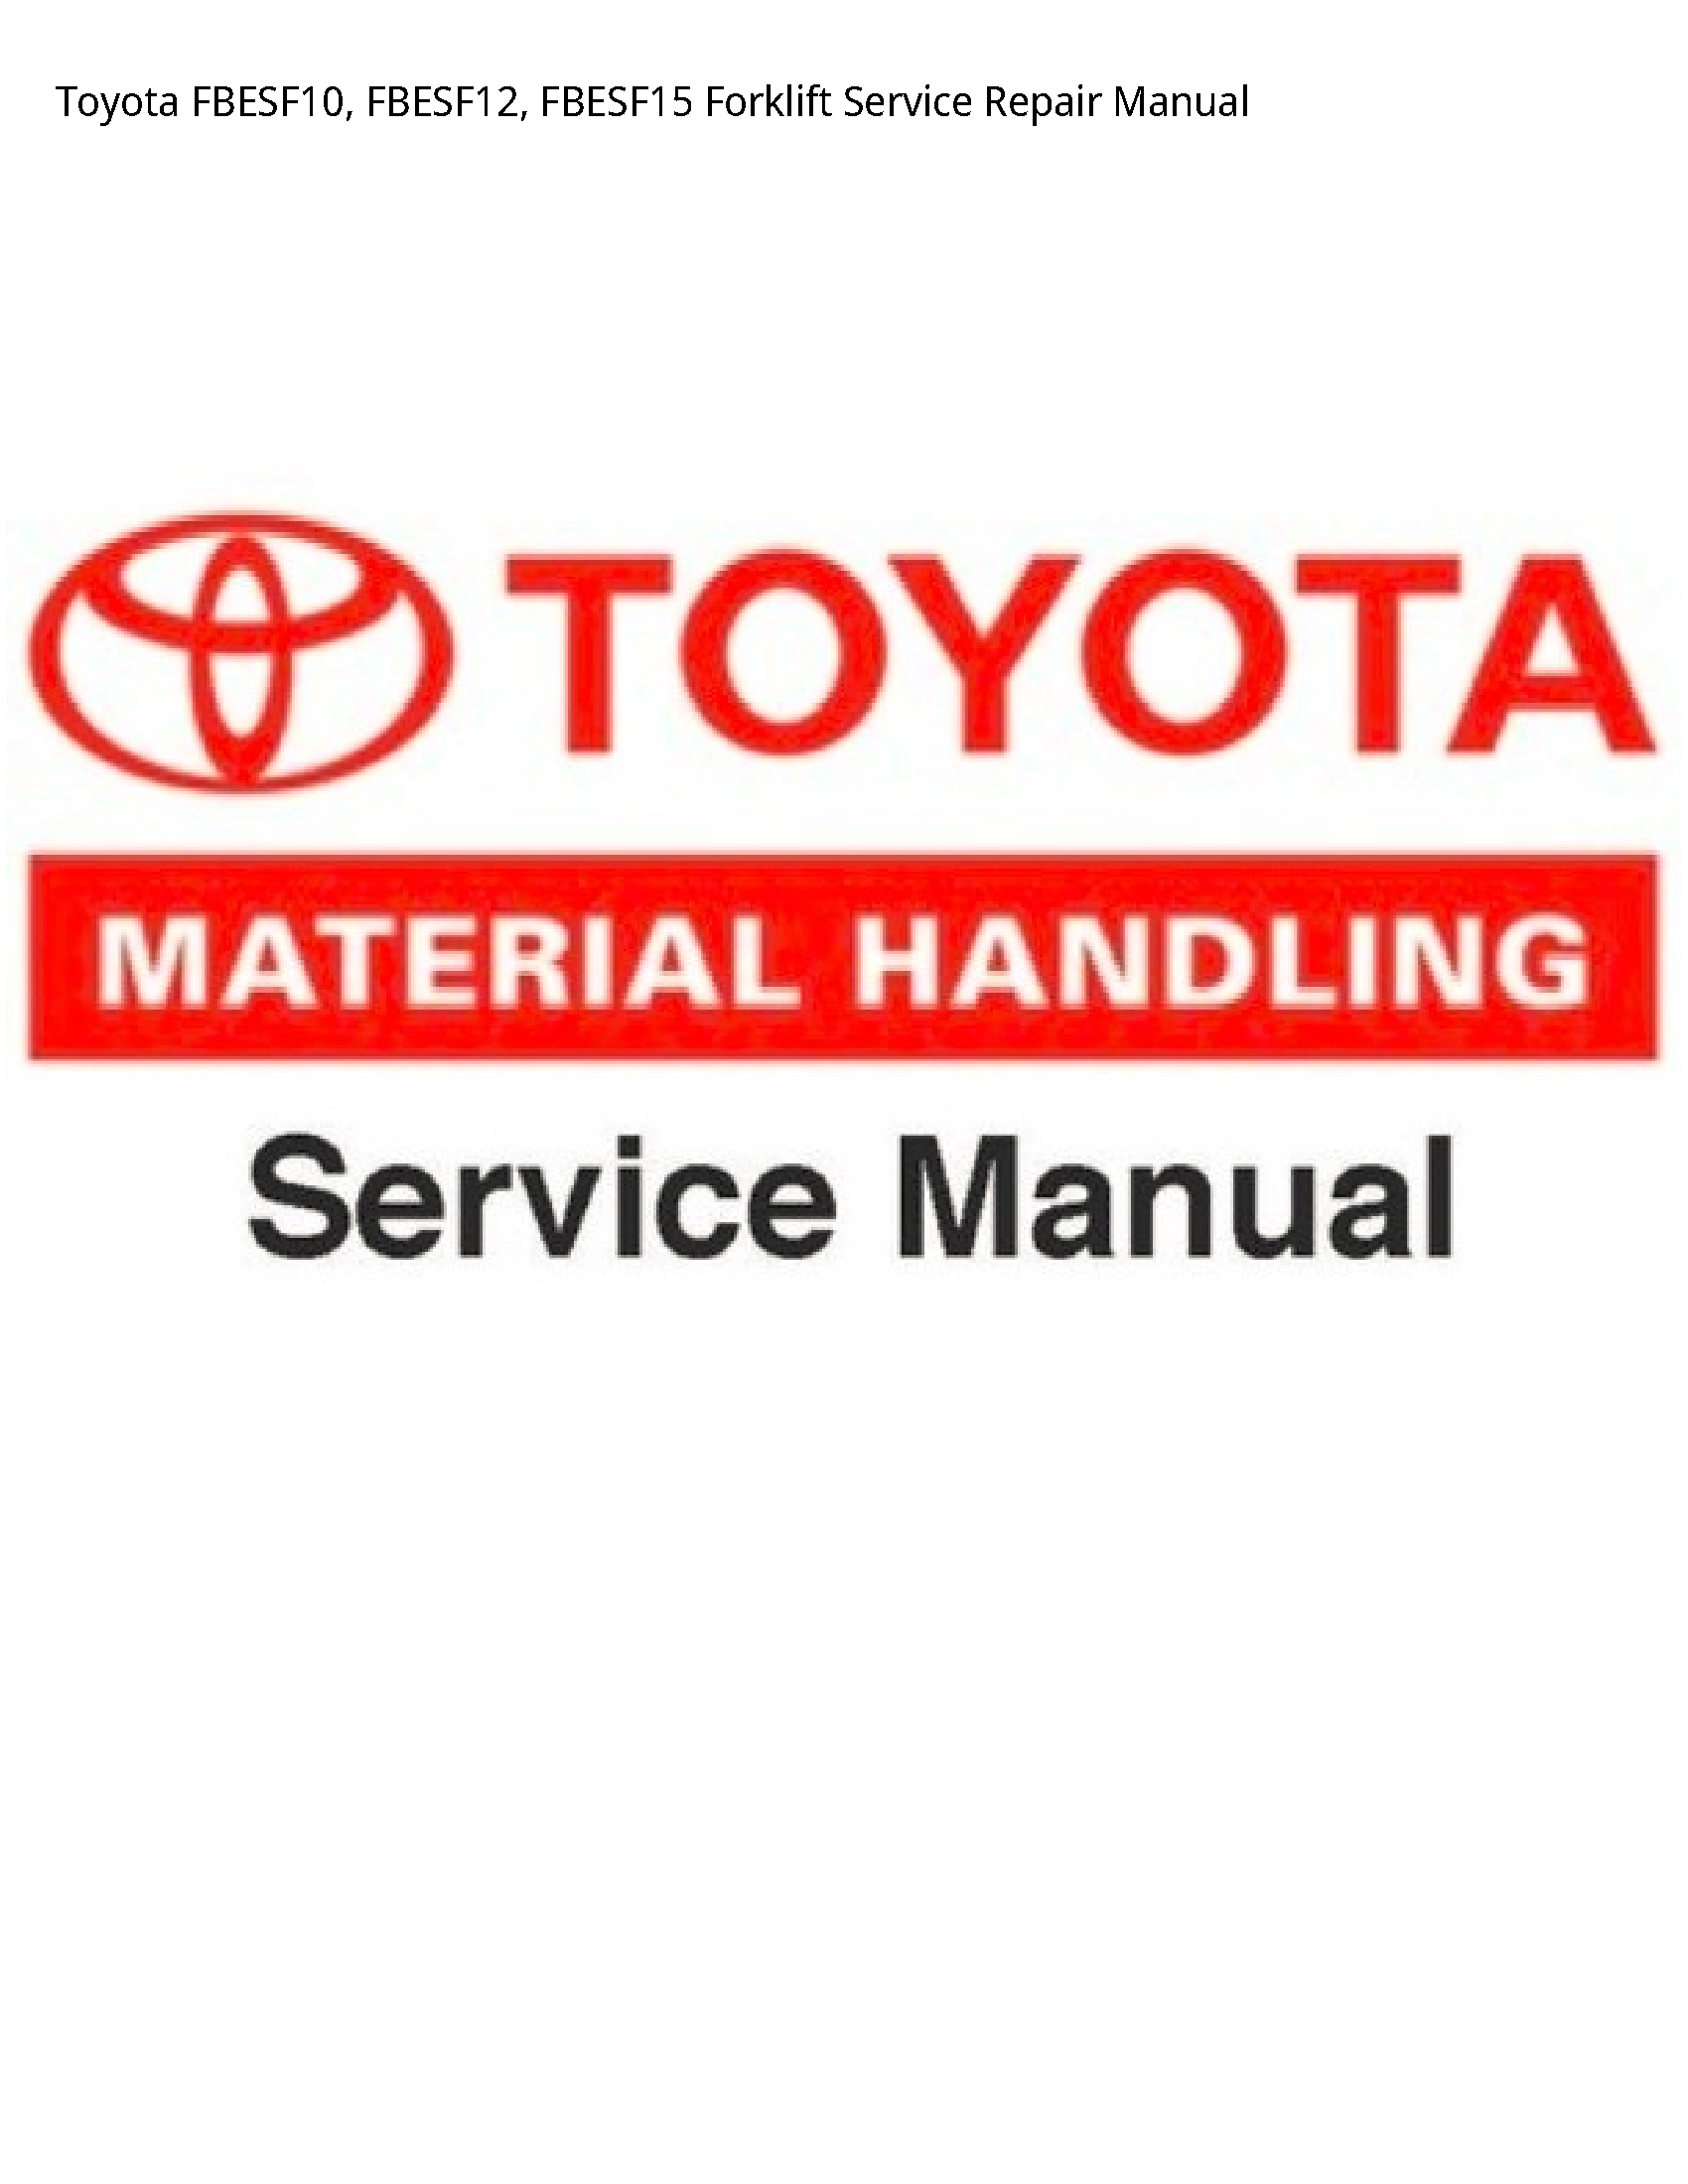 Toyota FBESF10 Forklift manual